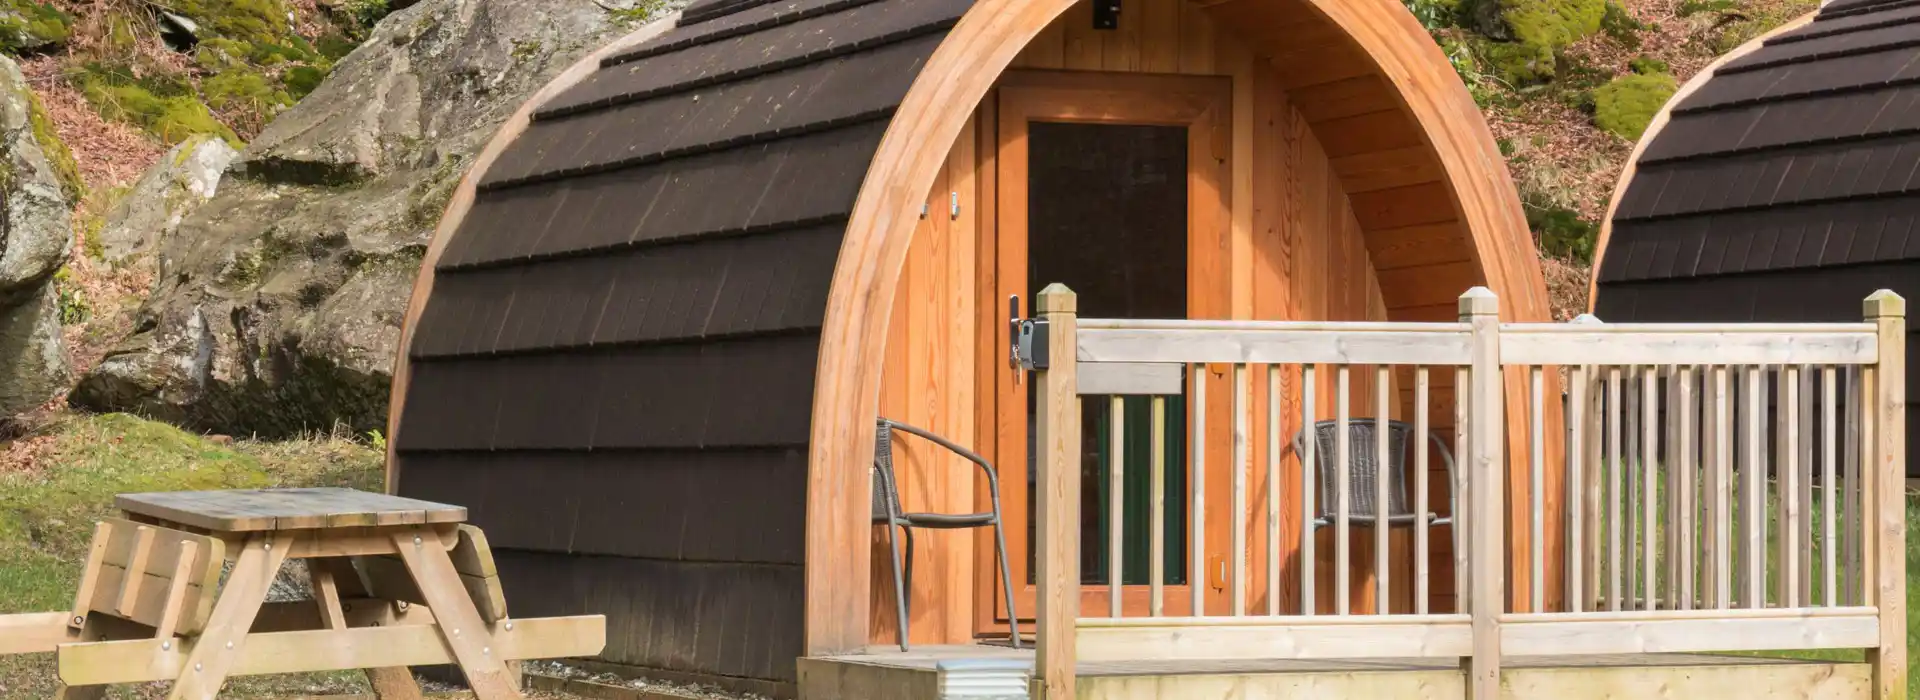 Bath camping and glamping pods